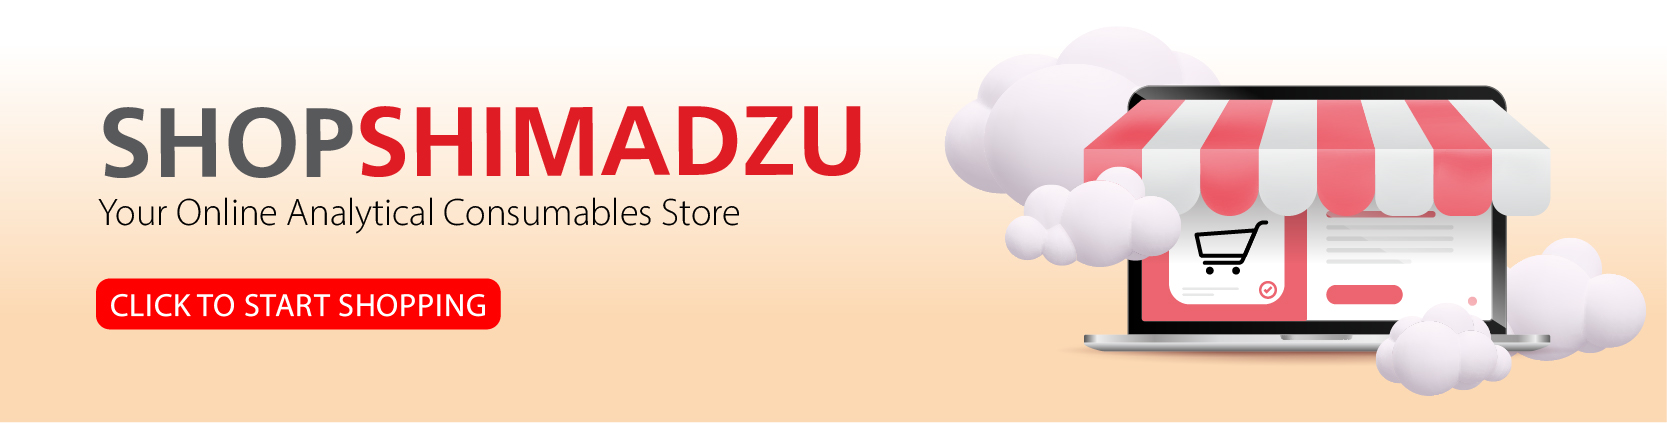 ShopShimadzu, Complete Solution for Analytical Consumables